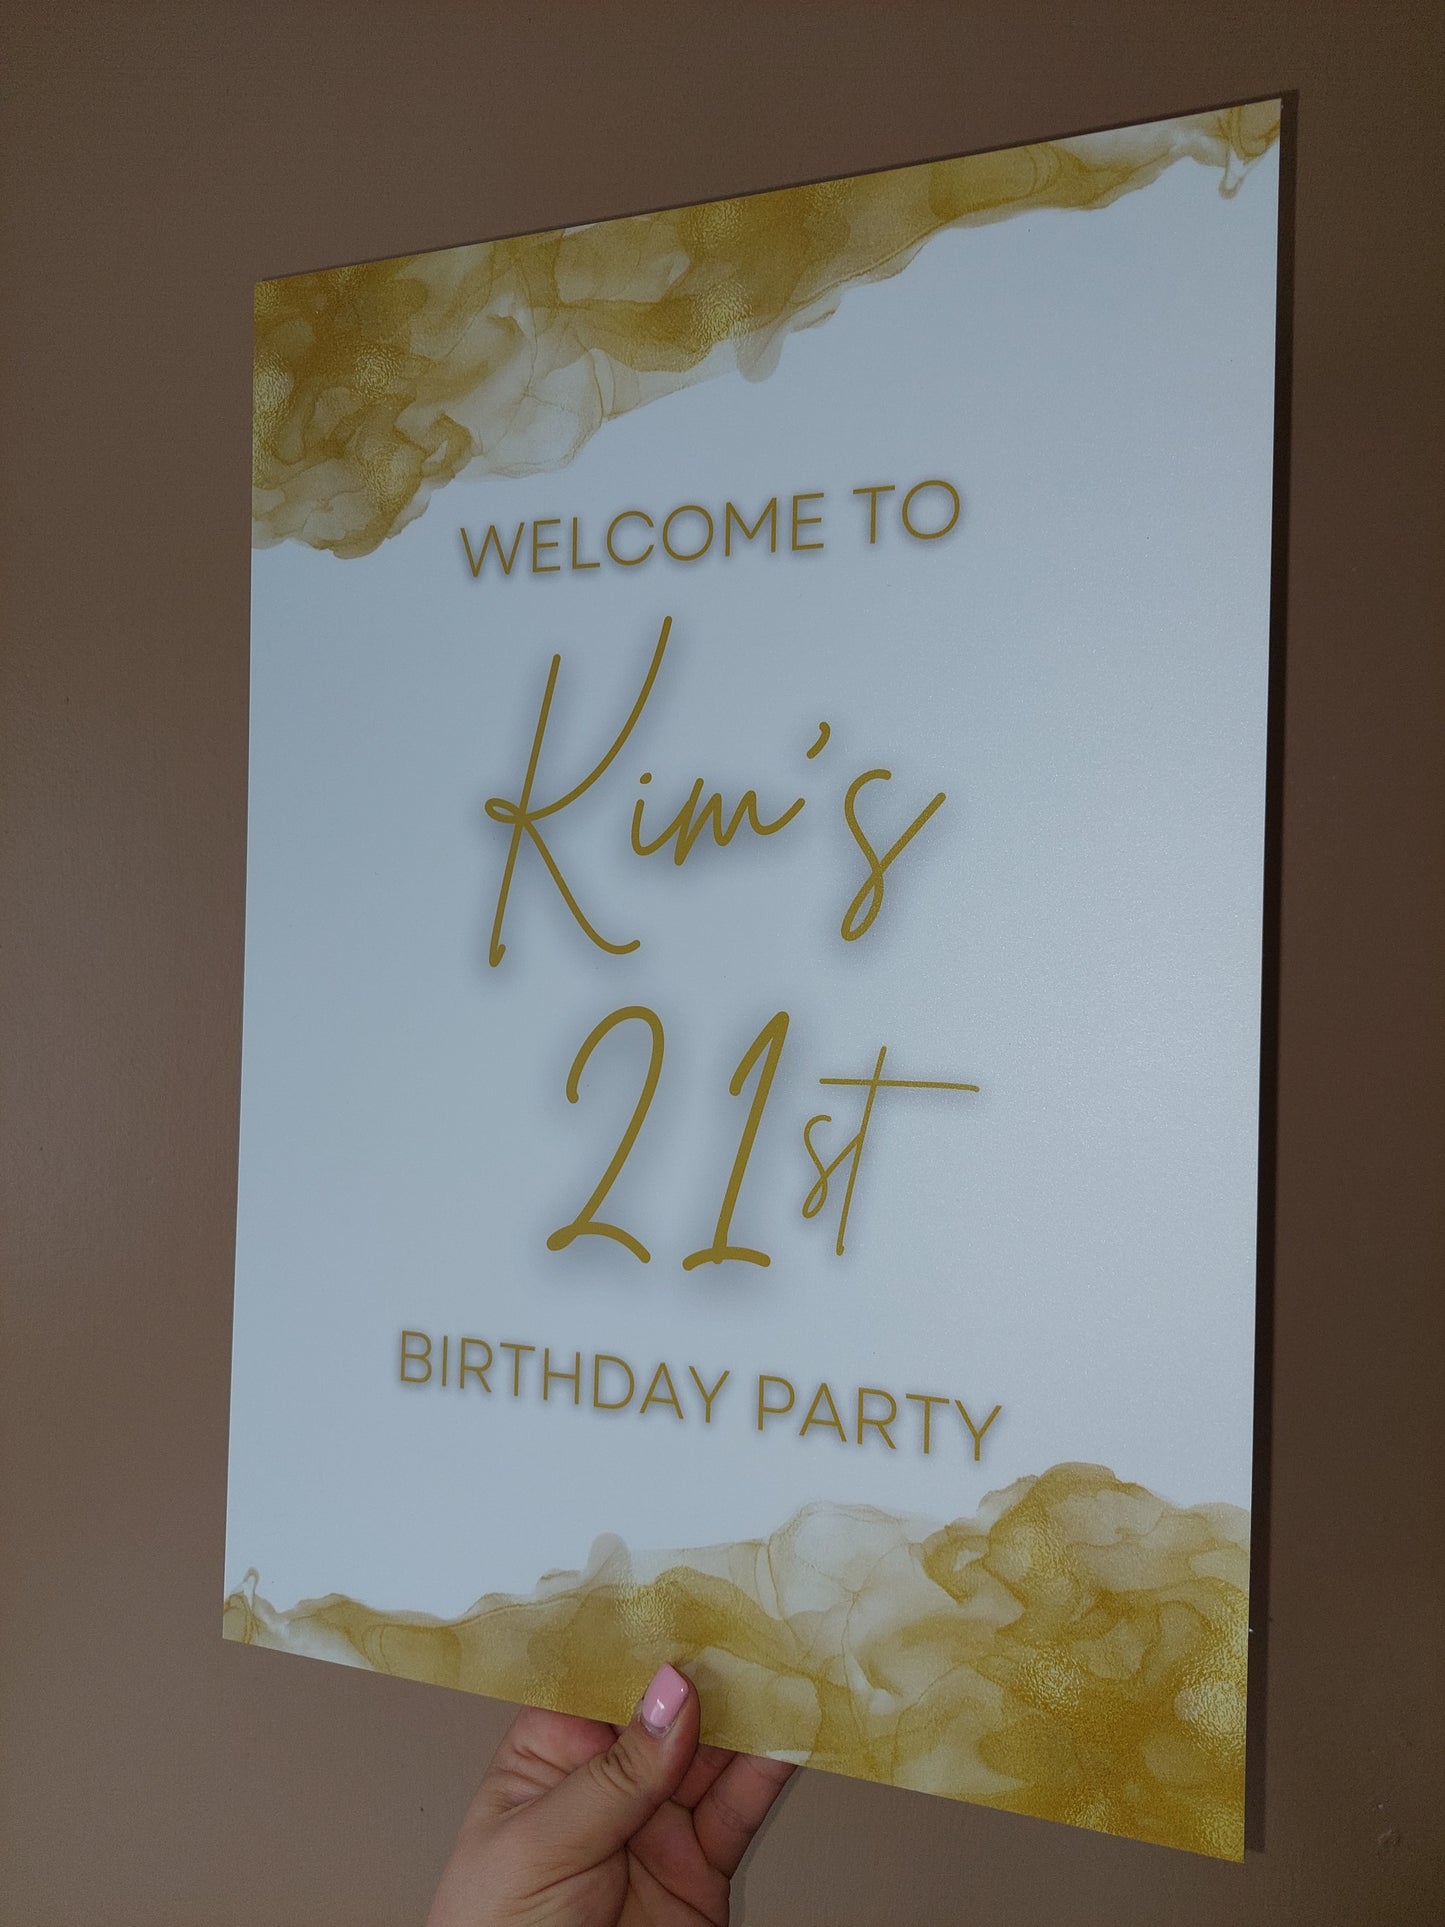 White & Gold Welcome Board Sign | Personalised Birthday Board | Birthday Party Sign | A4, A3, A2